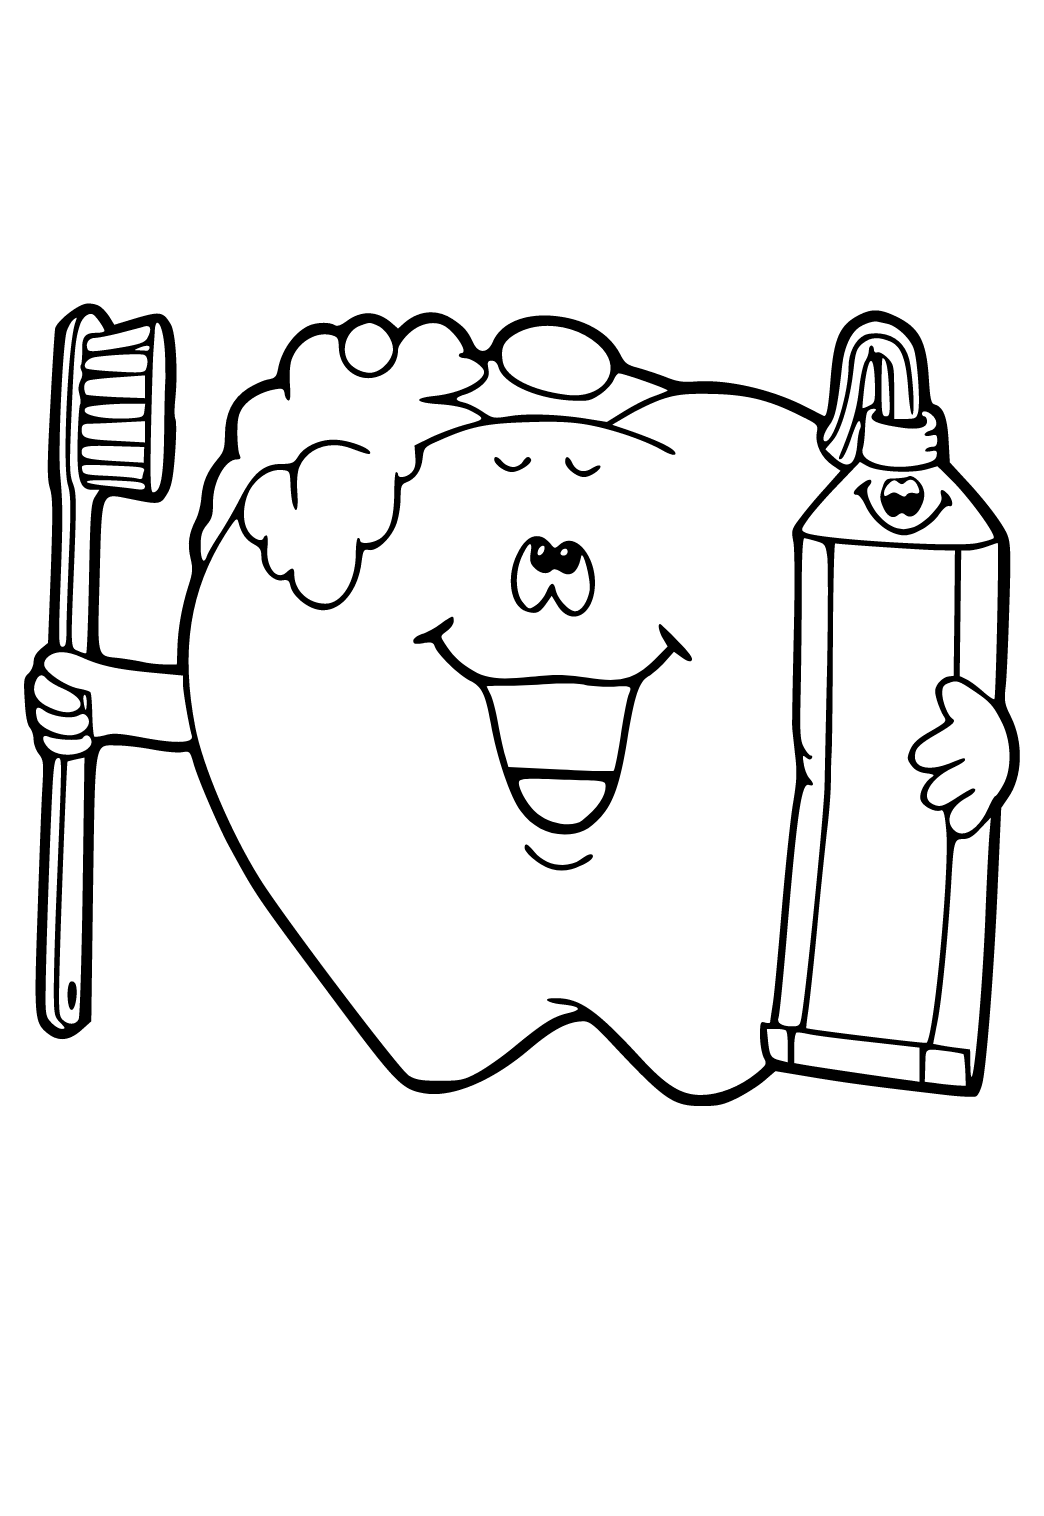 Free printable dental toothpaste coloring page for adults and kids